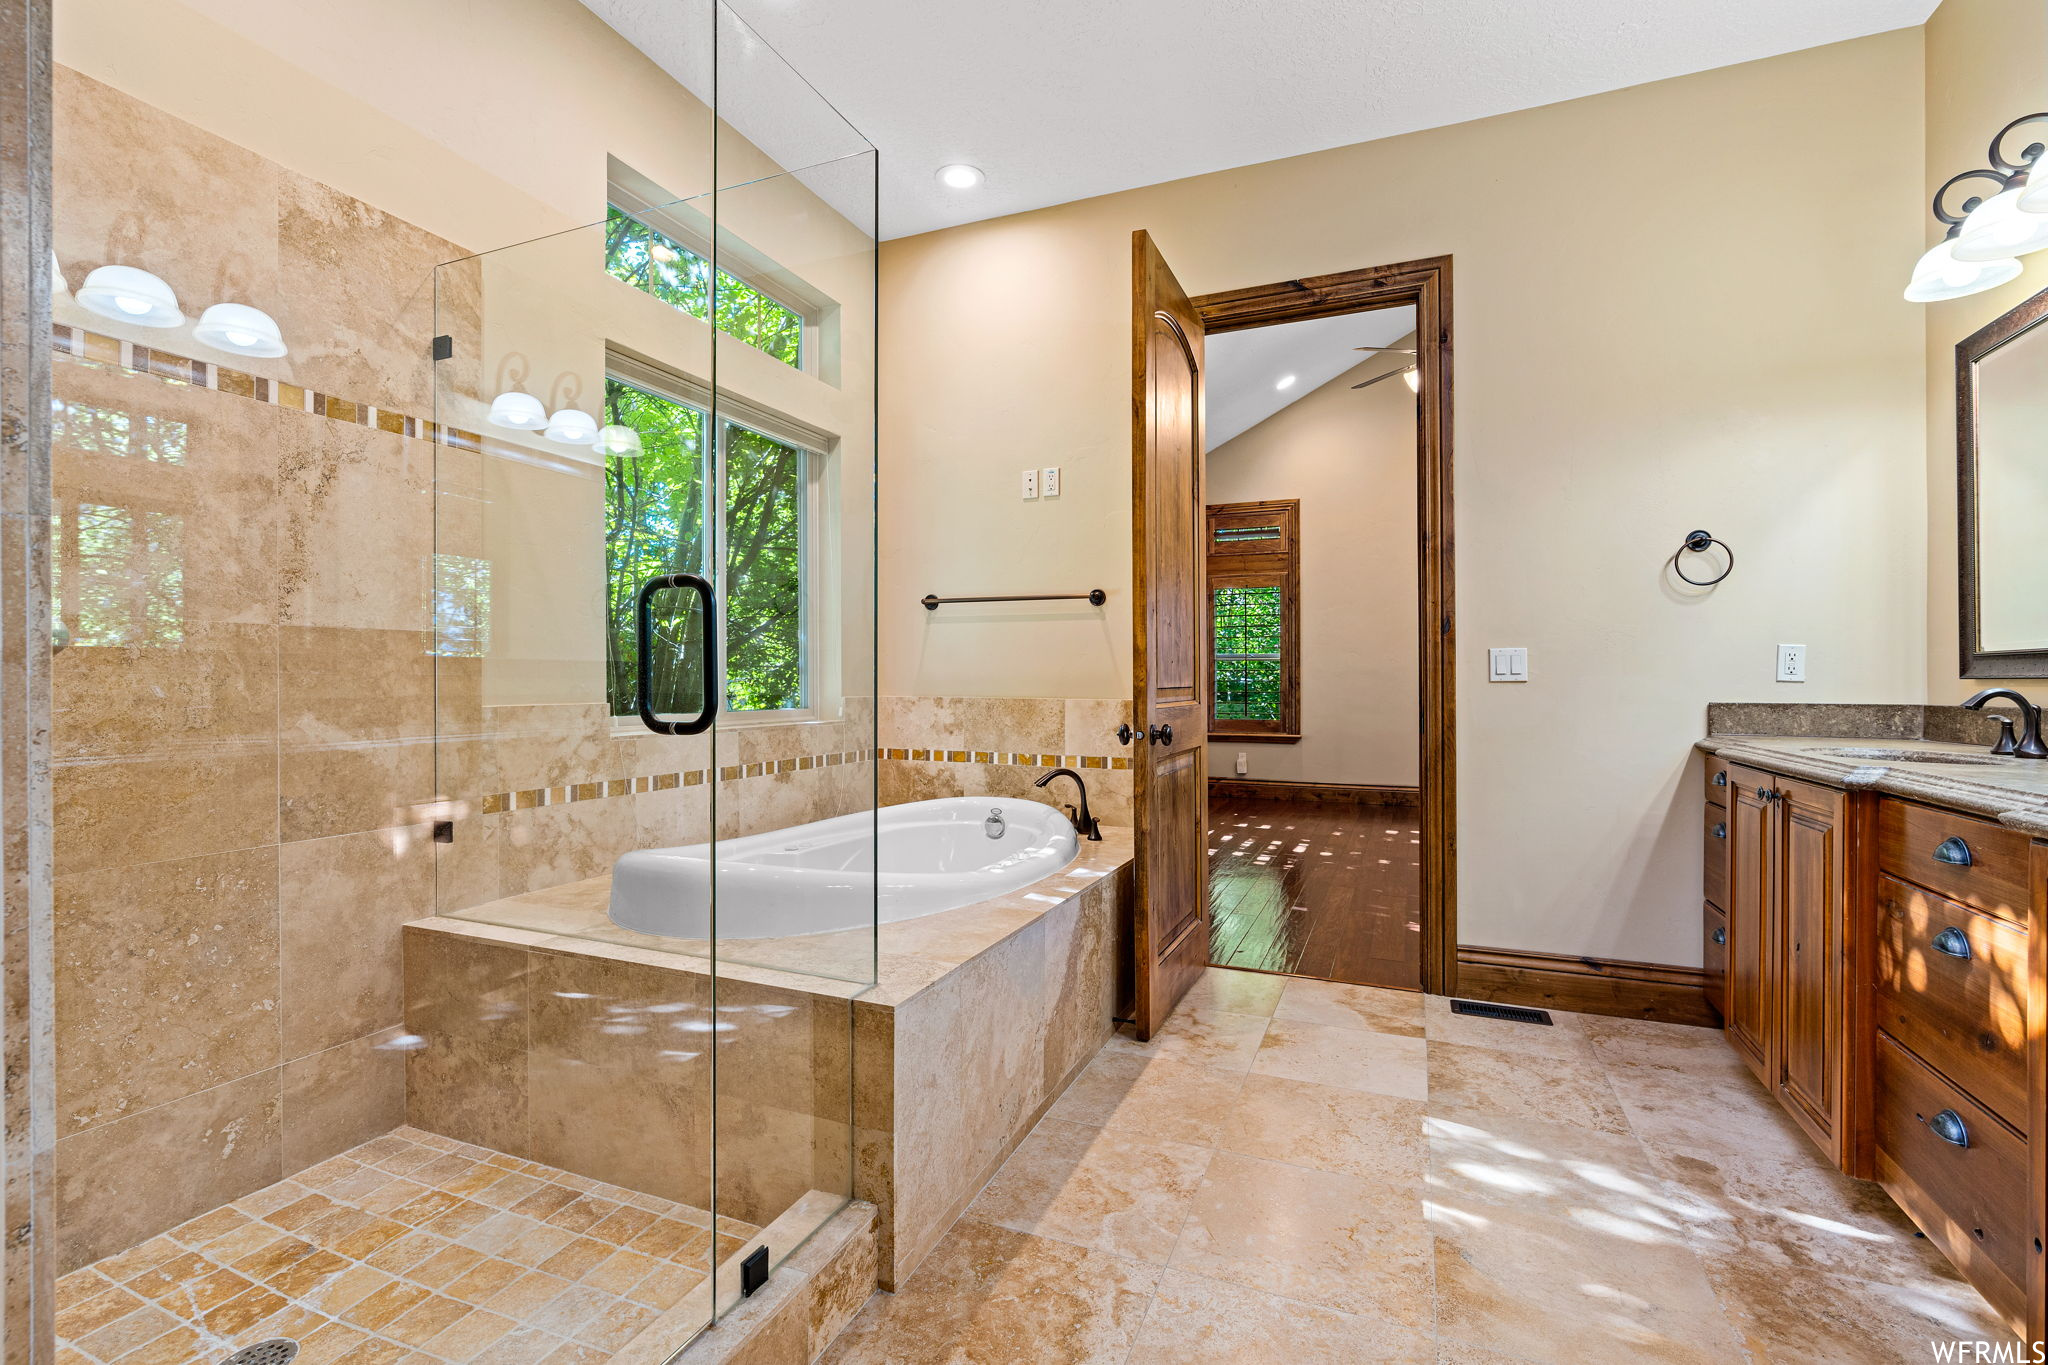 Bathroom featuring separate shower and tub, vanity, and tile floors